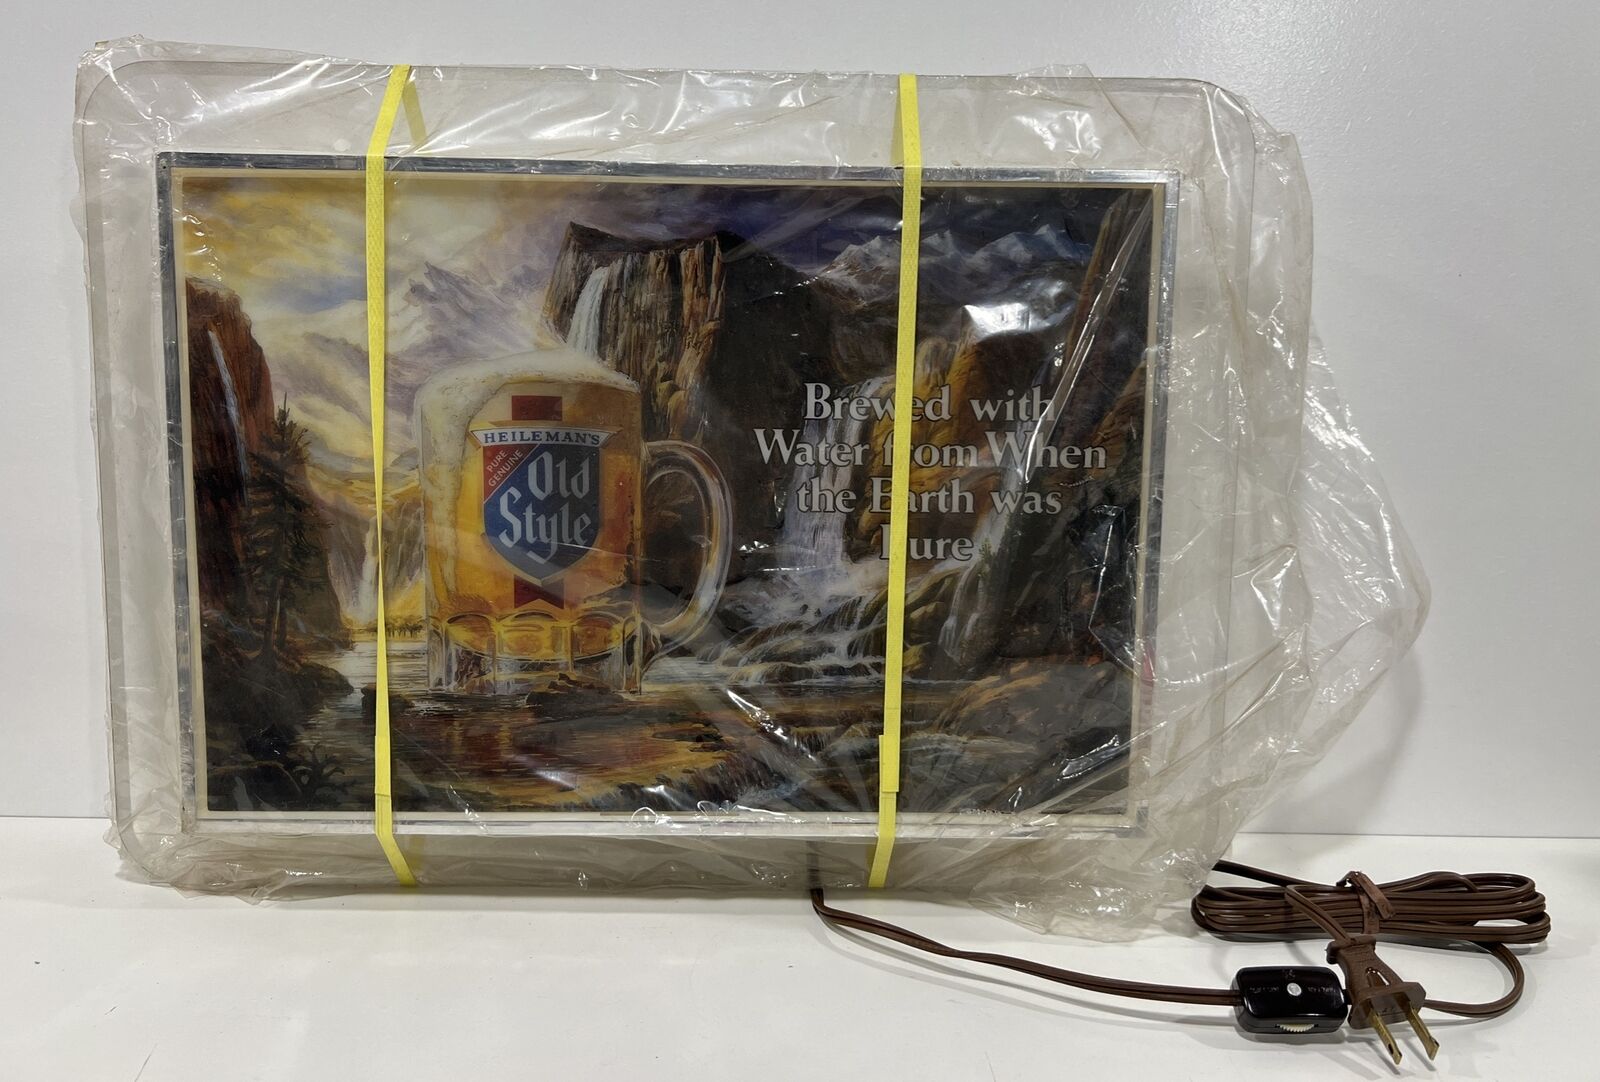 Vintage Heileman\'s Old Style Lighted Beer Sign When the Earth Was Pure 1986 NOS